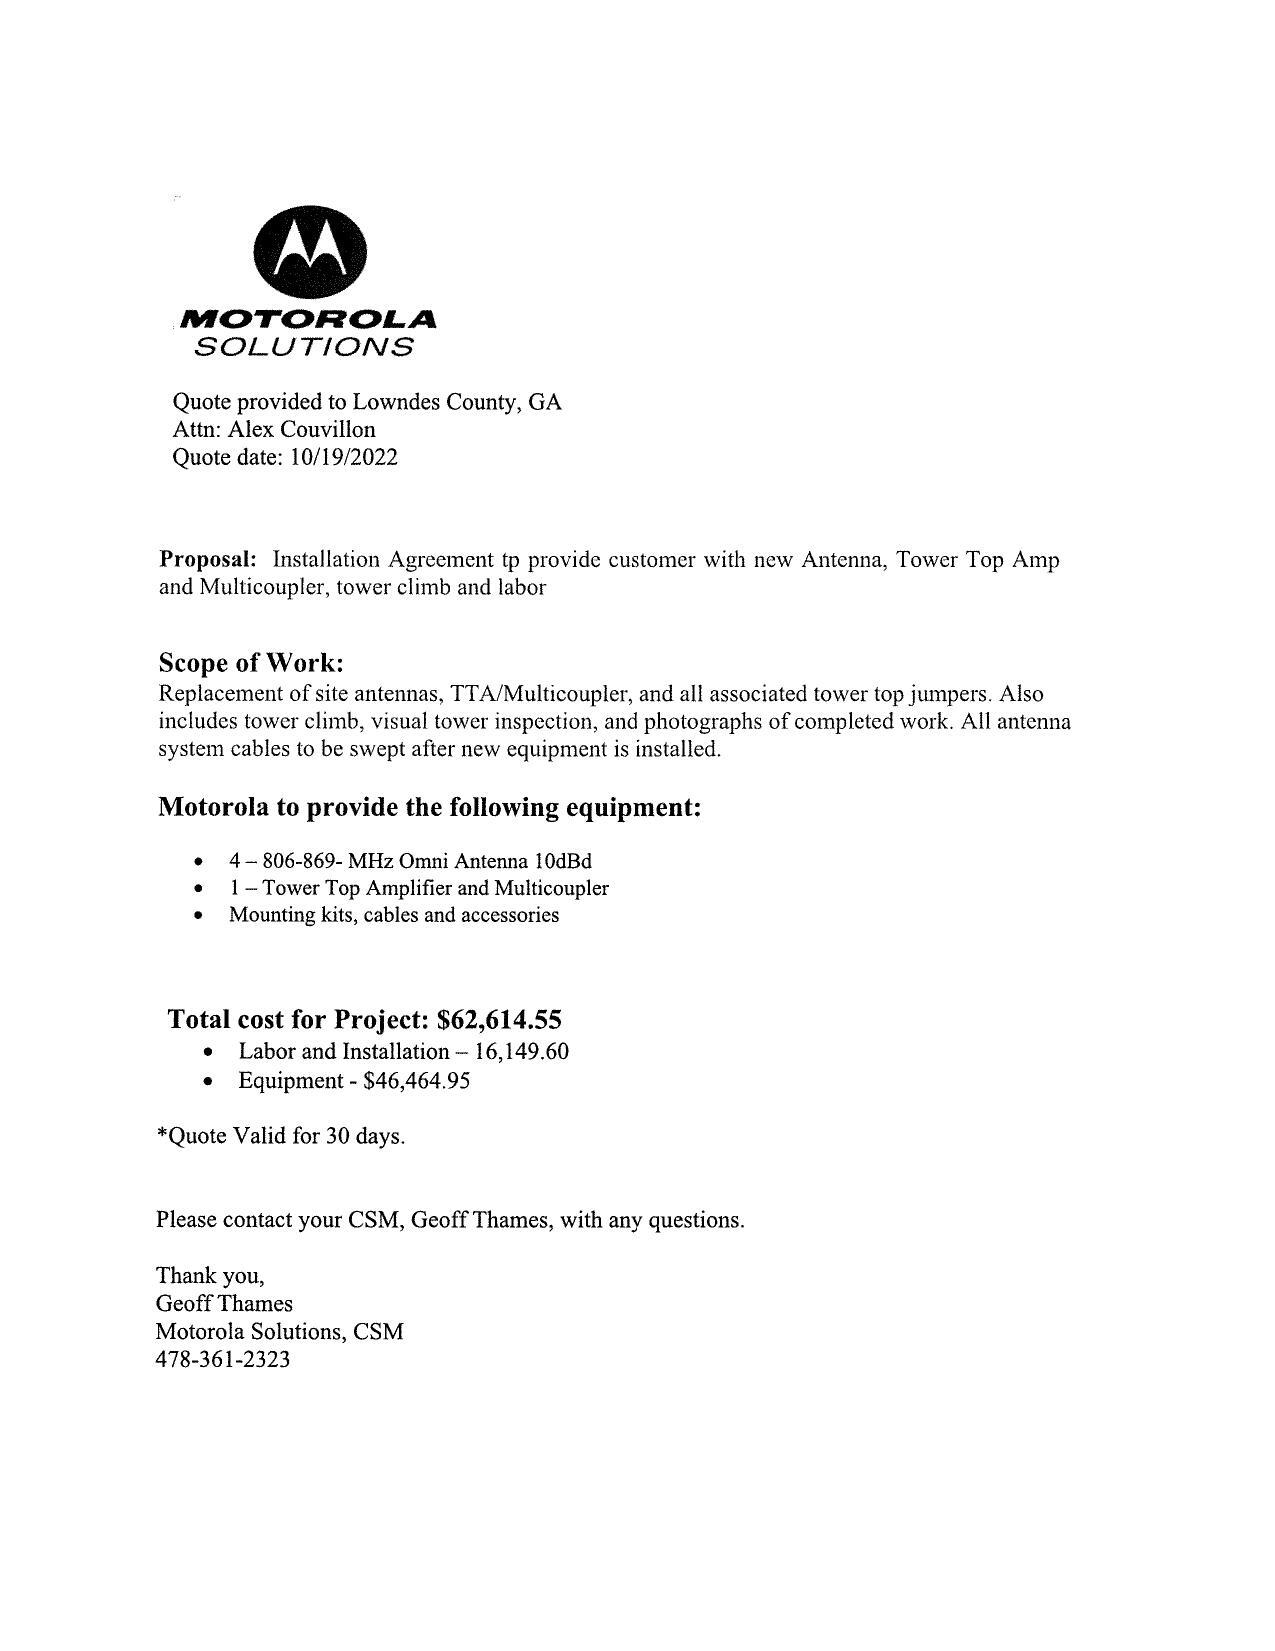 Proposal by Motorola Solutions